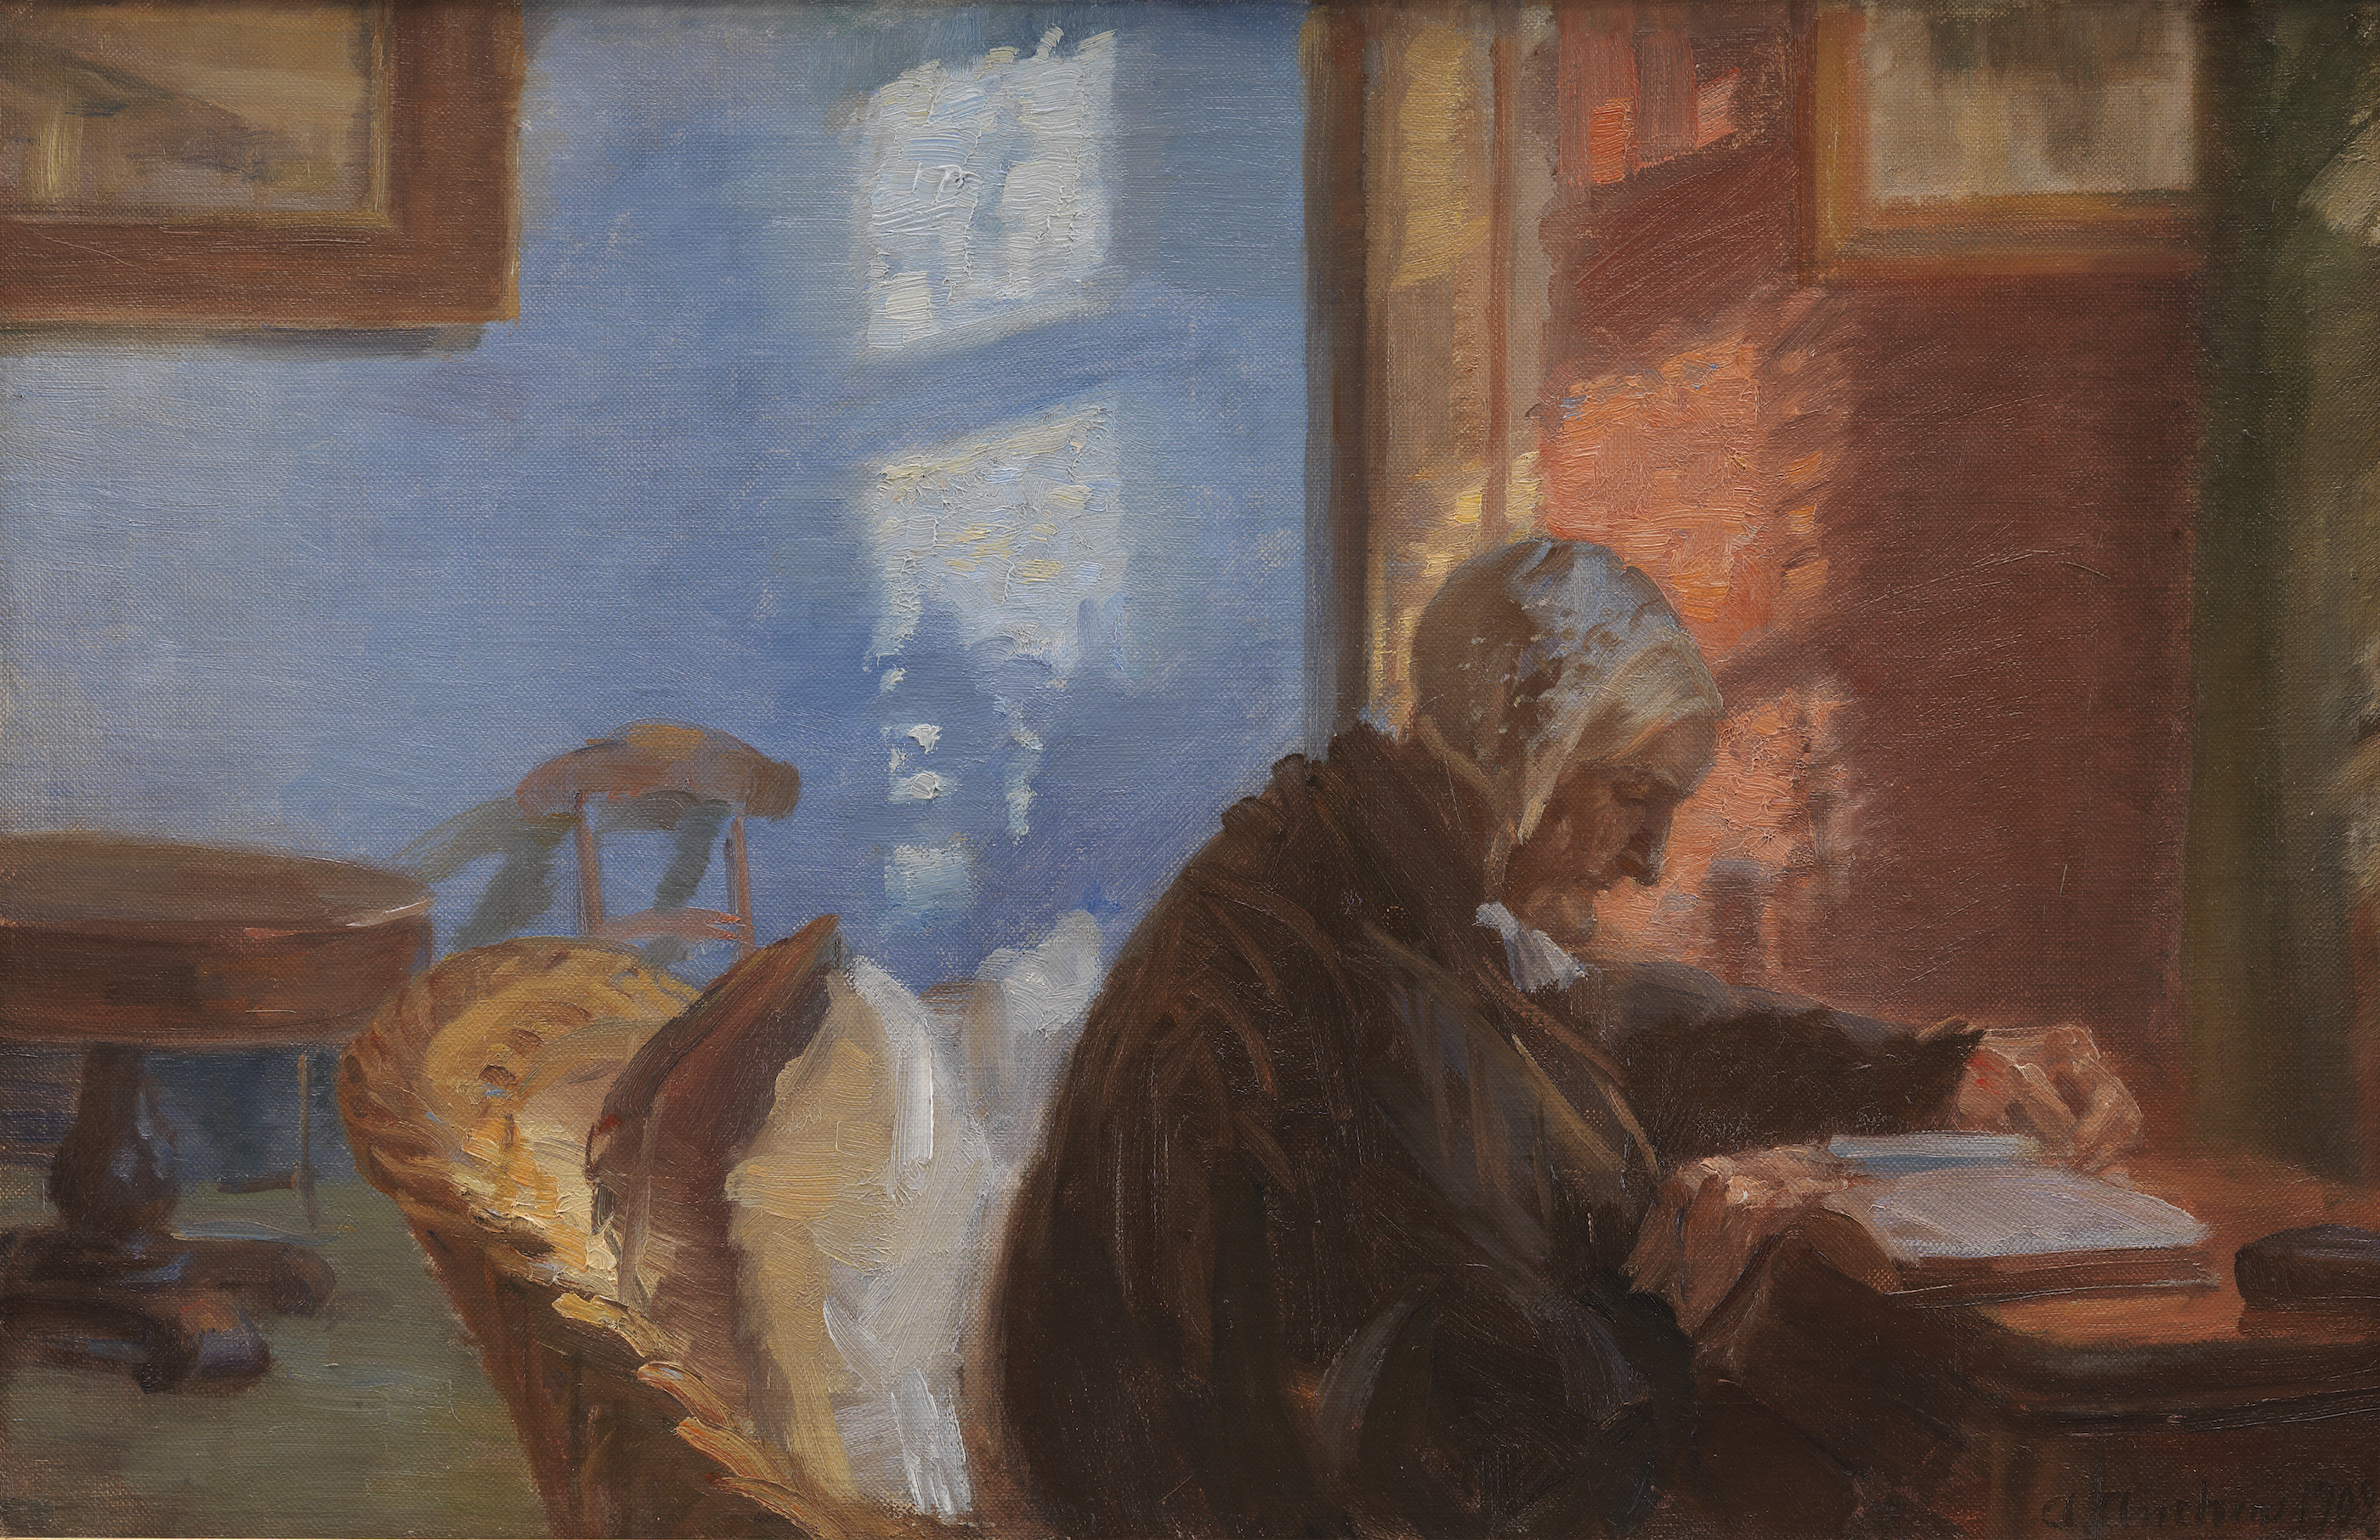 The Artist’s Mother Ane Hedvig Brøndum in the Blue Room by Anna Ancher - 1909. - 38,8 x 56,8 cm Statens Museum for Kunst